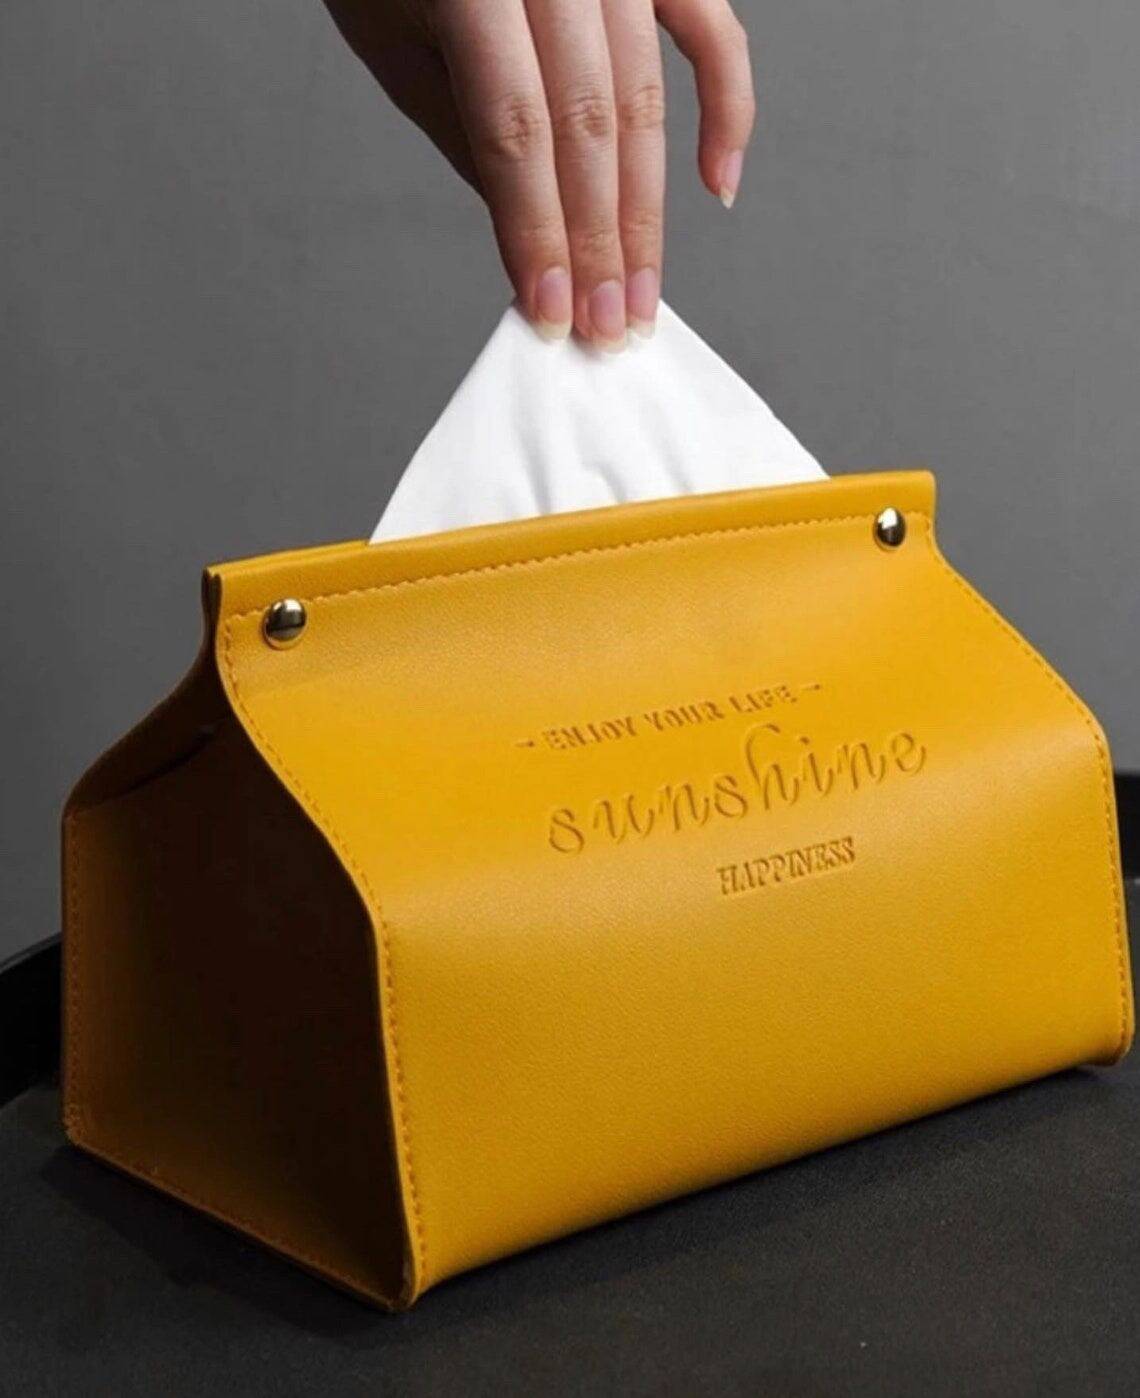 A hand pulls a tissue from a yellow pu leather tissue box